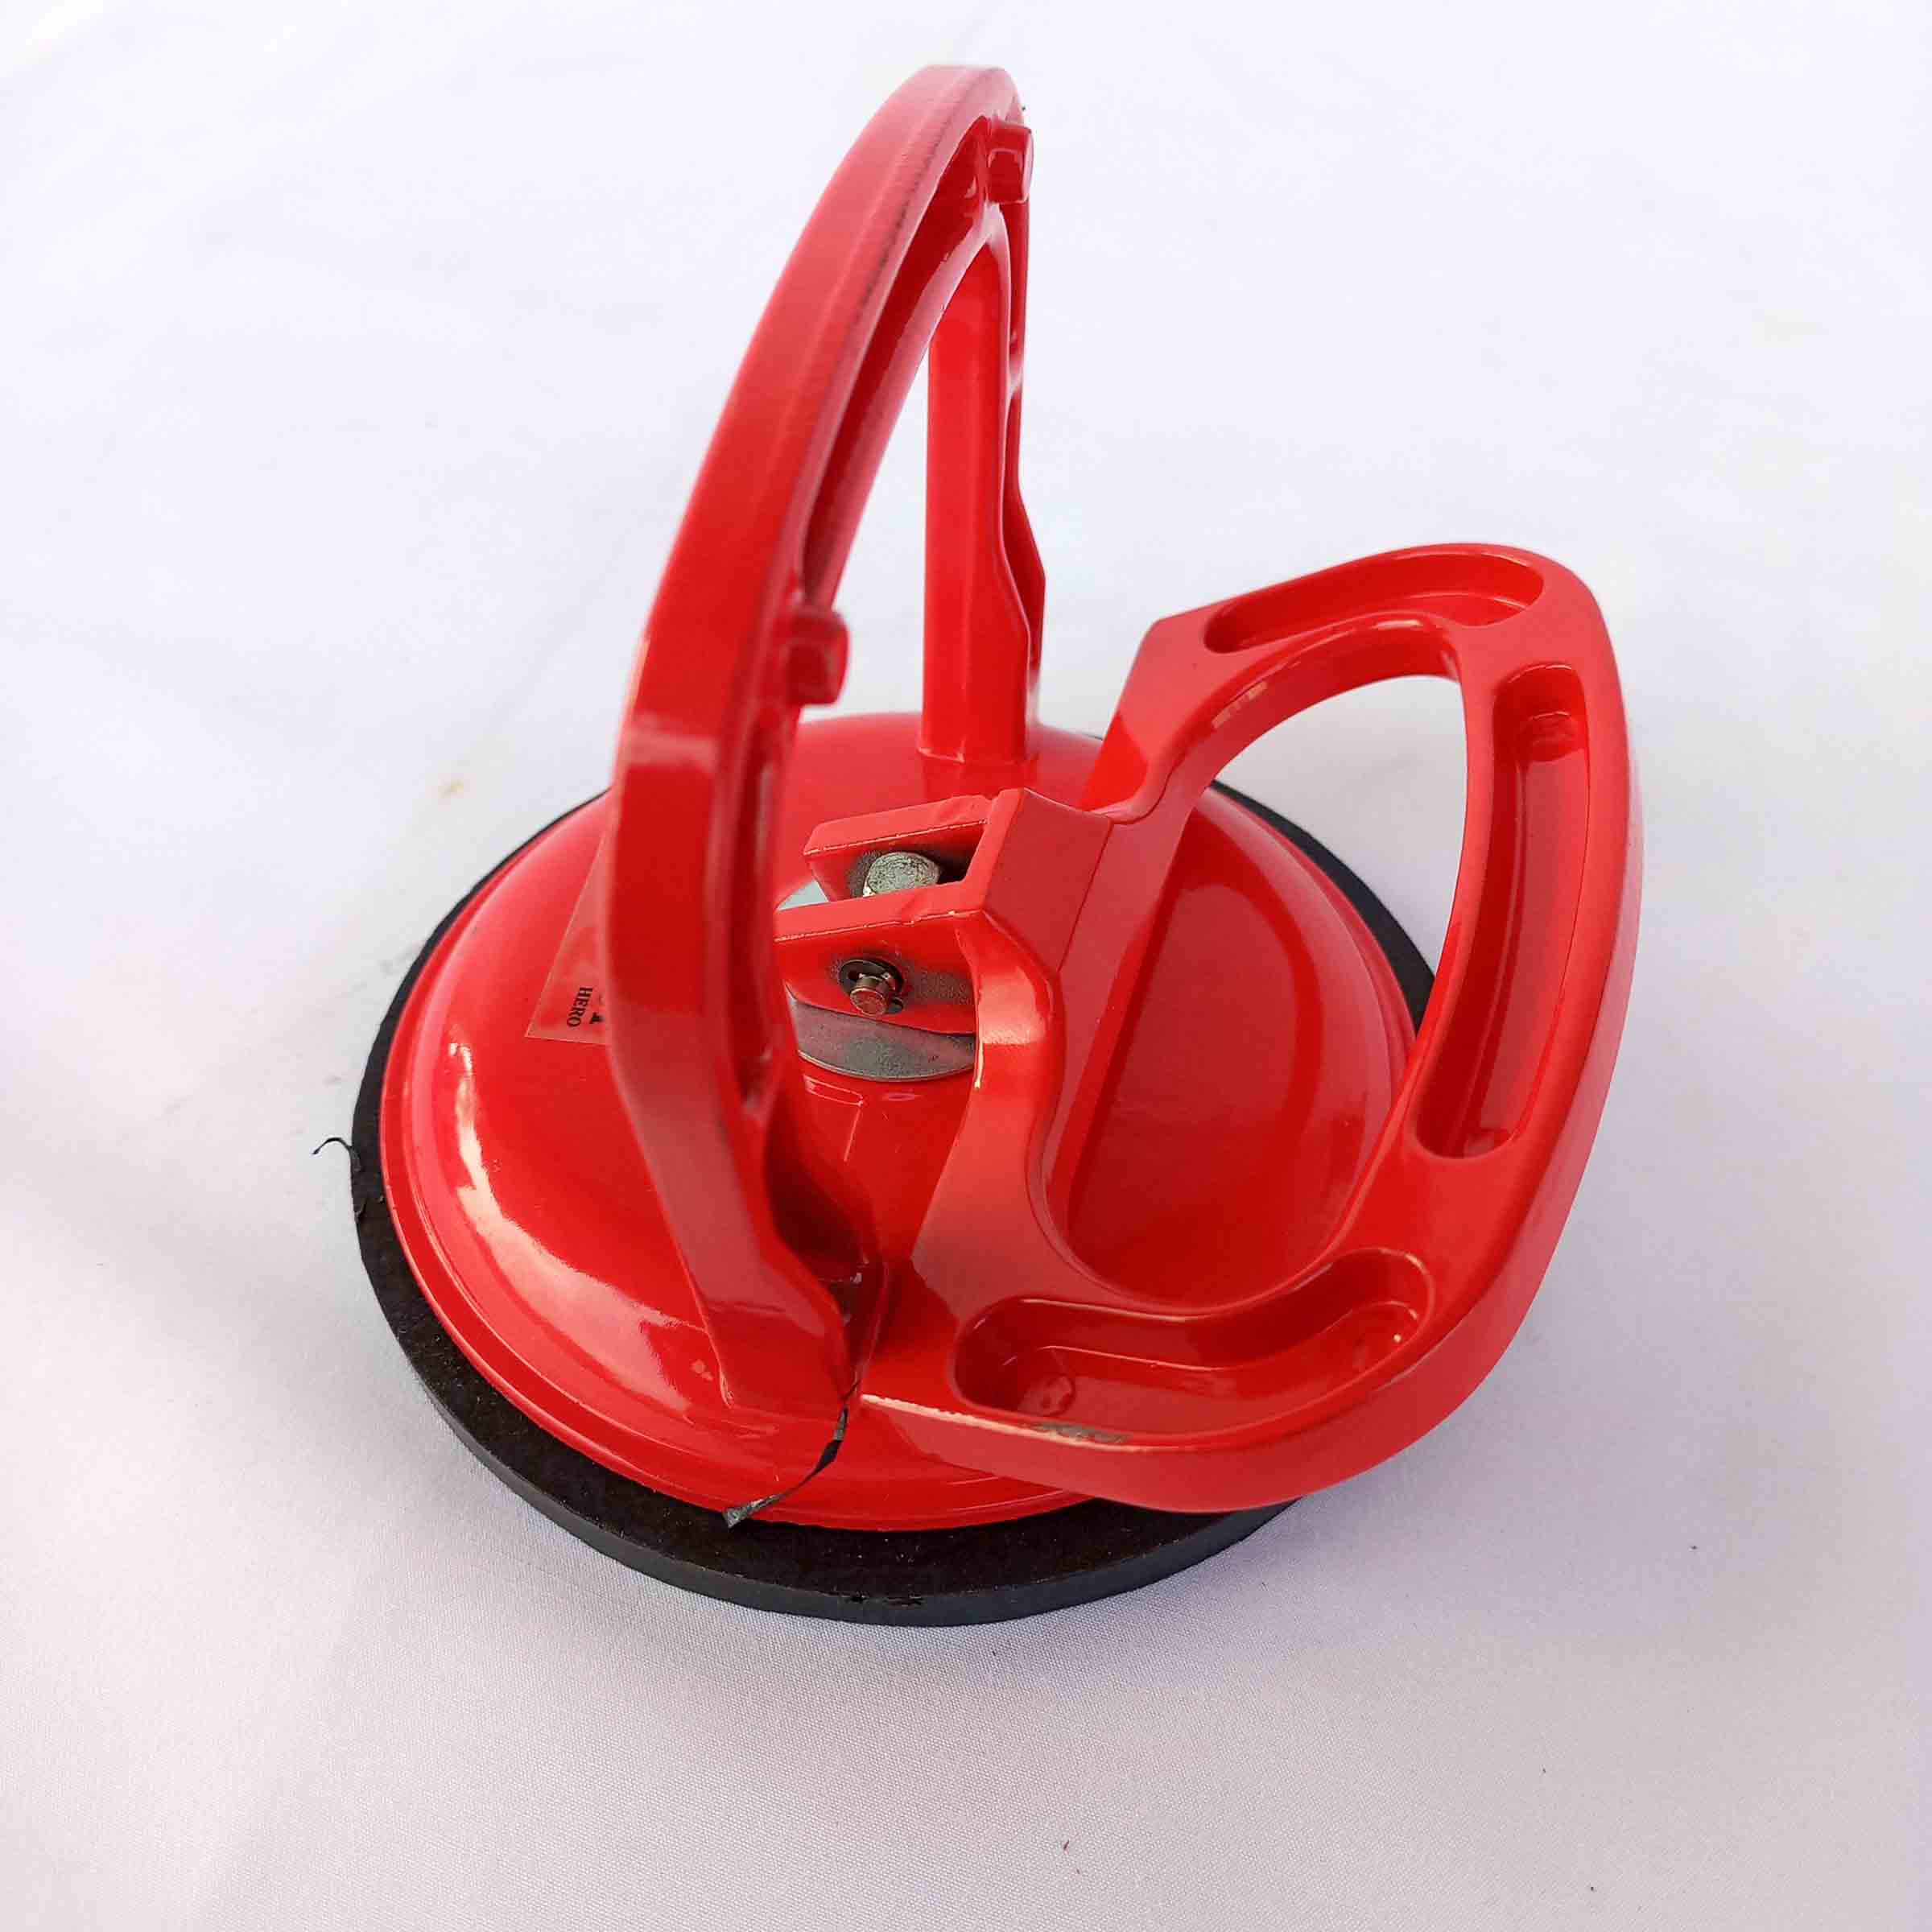 Vacuum Suction Lifter (Single Cup)(130 kgs) - Vacuum Suction Cup